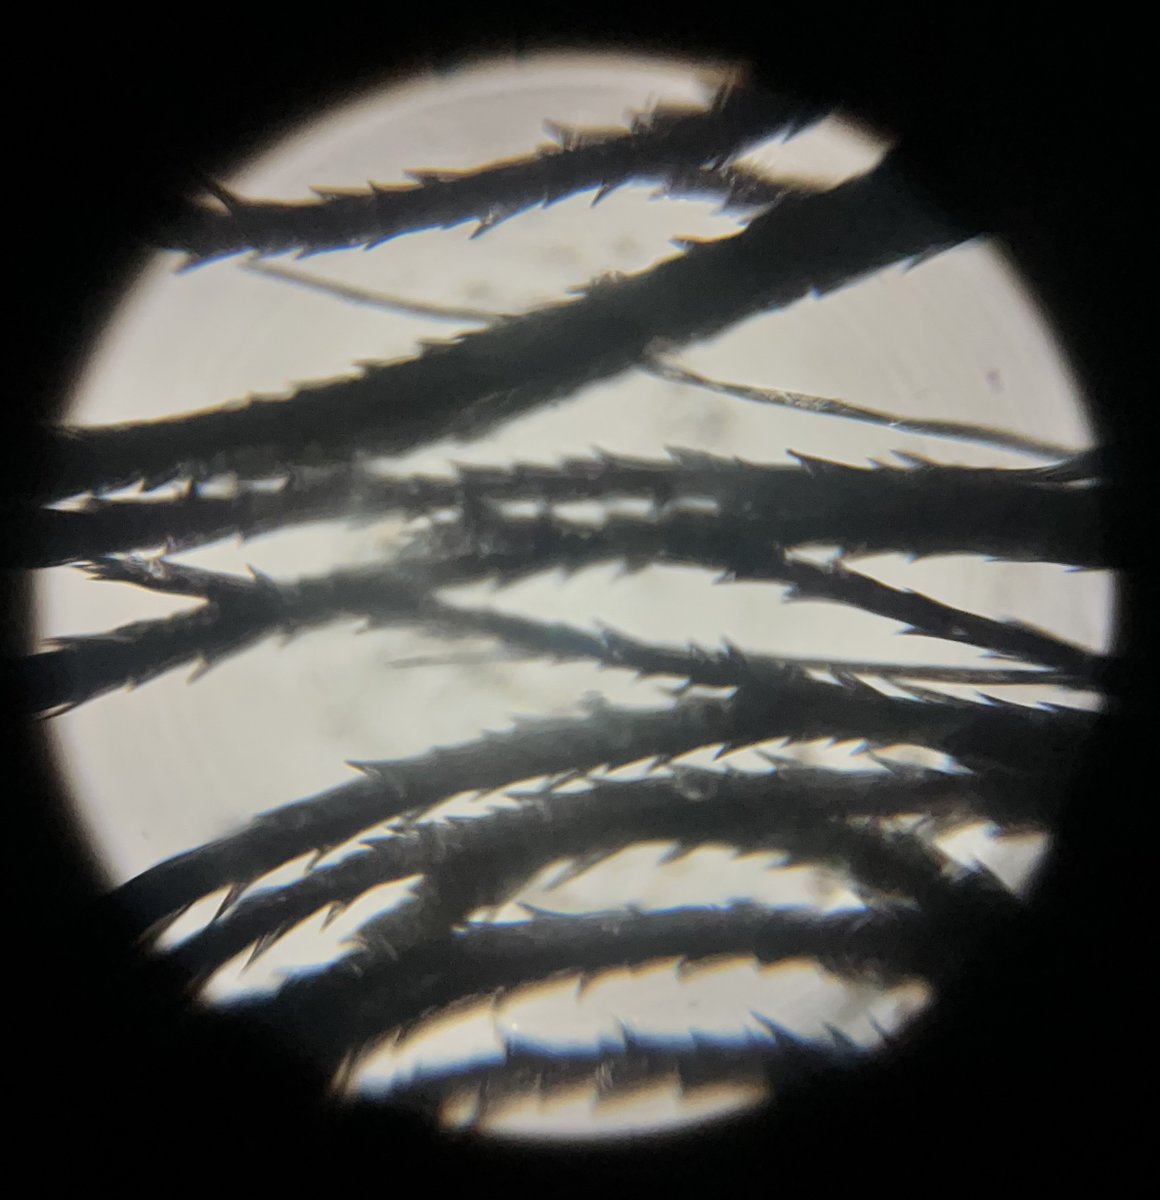 Adventures In Microscopy When the small imitates the large Is it just me, or does this microscopic picture of grass seed bristles look like a full moon w/ tree branches in front of it? (#Foldscope 2.0, 140X magnification) #FearlessMicroscopy #microscopy #ScienceIsFun #STEAM